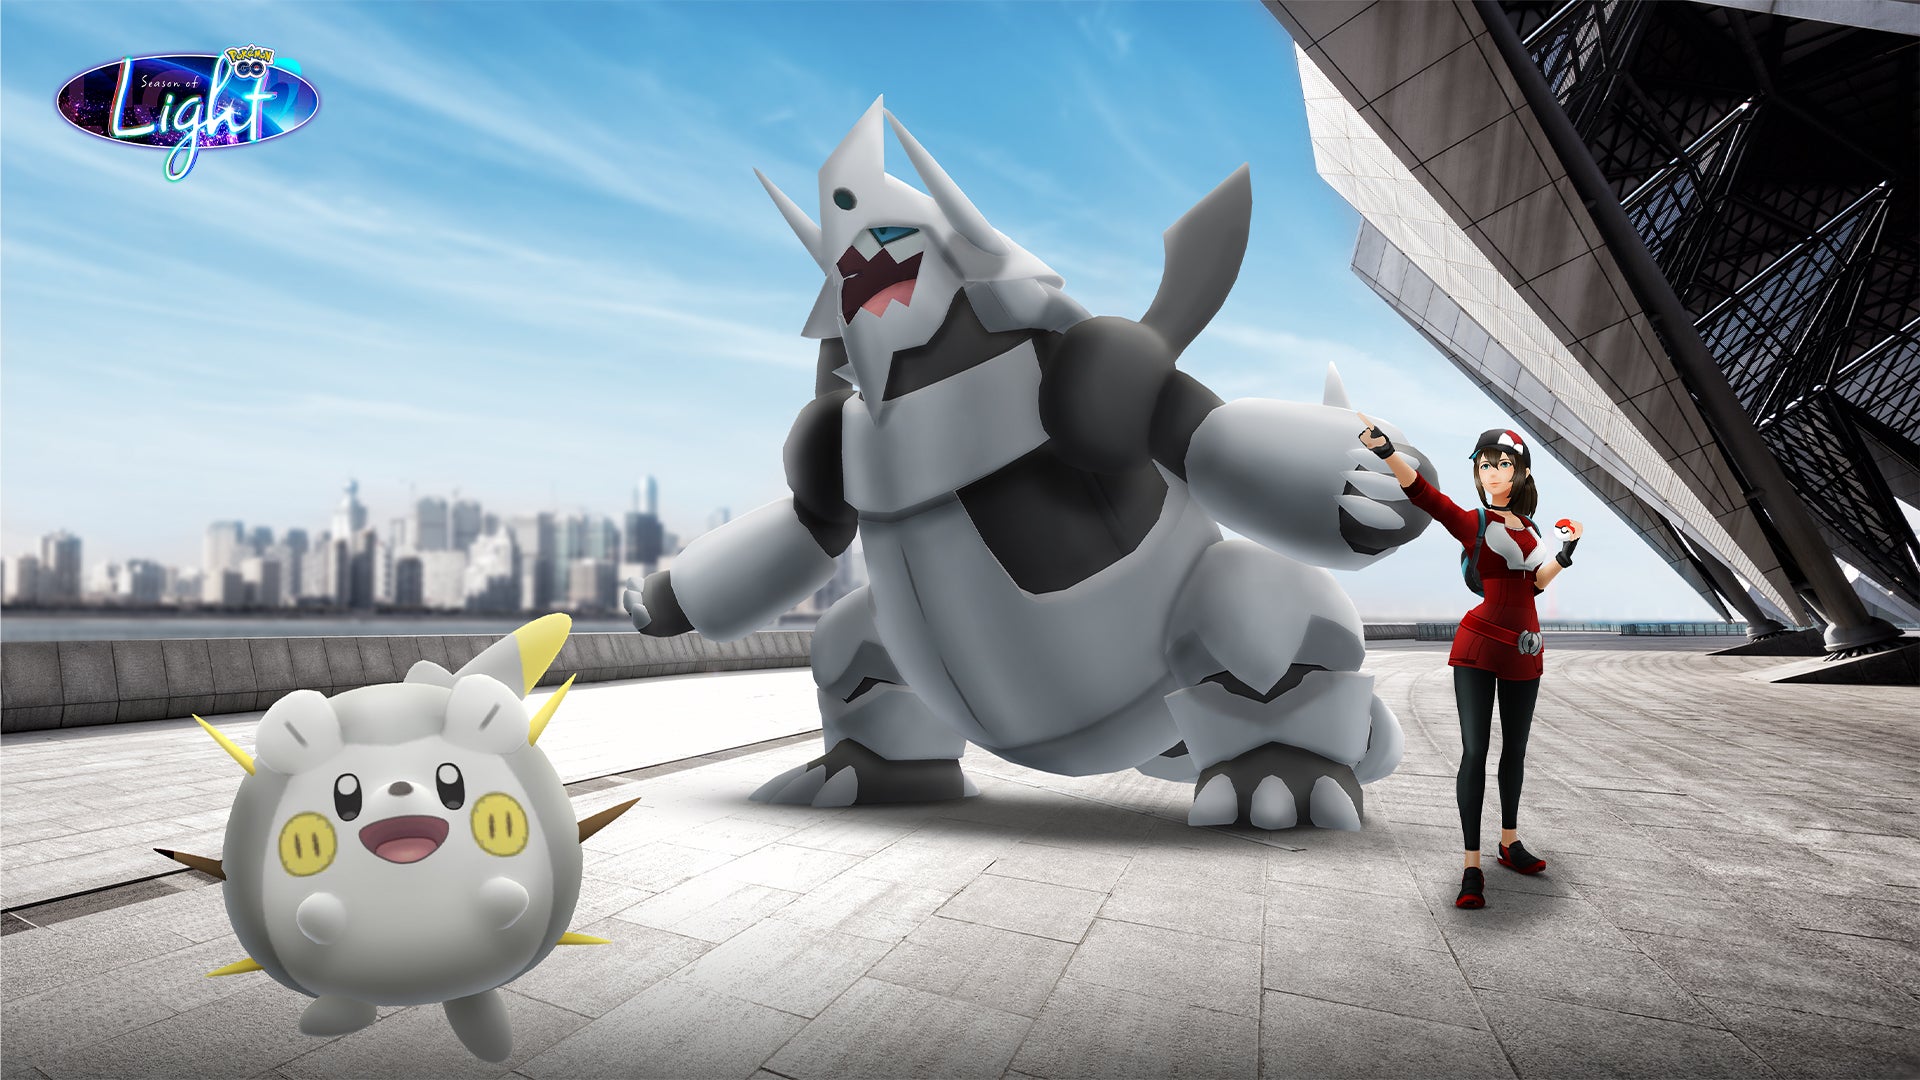 Togedemaru and Mega Aggron stand beside a Pokémon Trainer in Pokemon GO artwork.